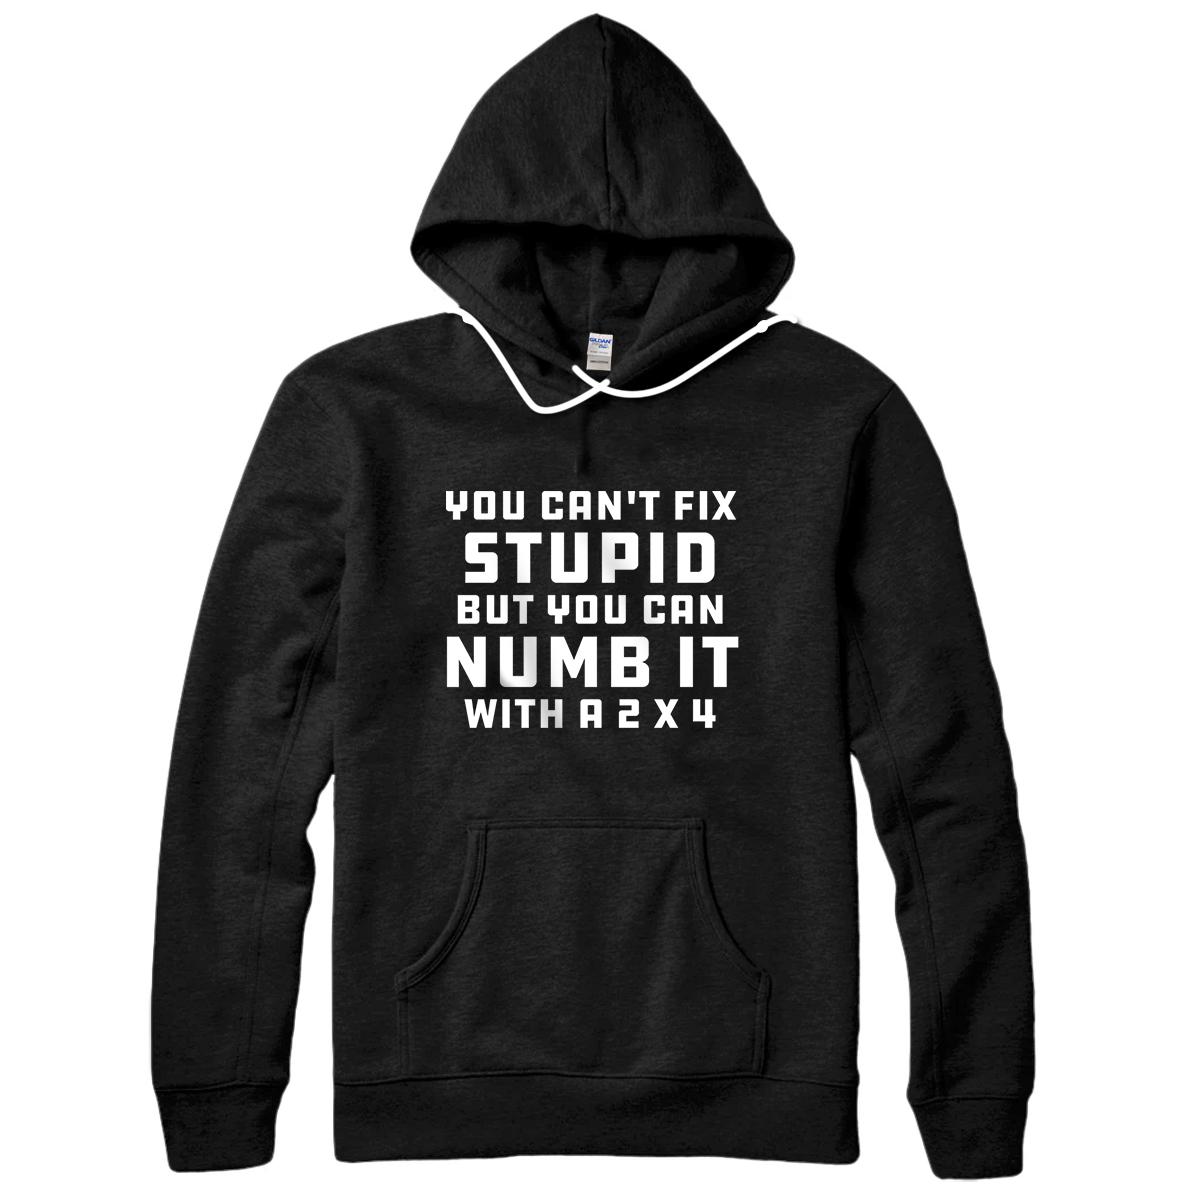 Personalized You Can't Fix Stupid But You Can Numb it With a 2 x 4 Joke Pullover Hoodie